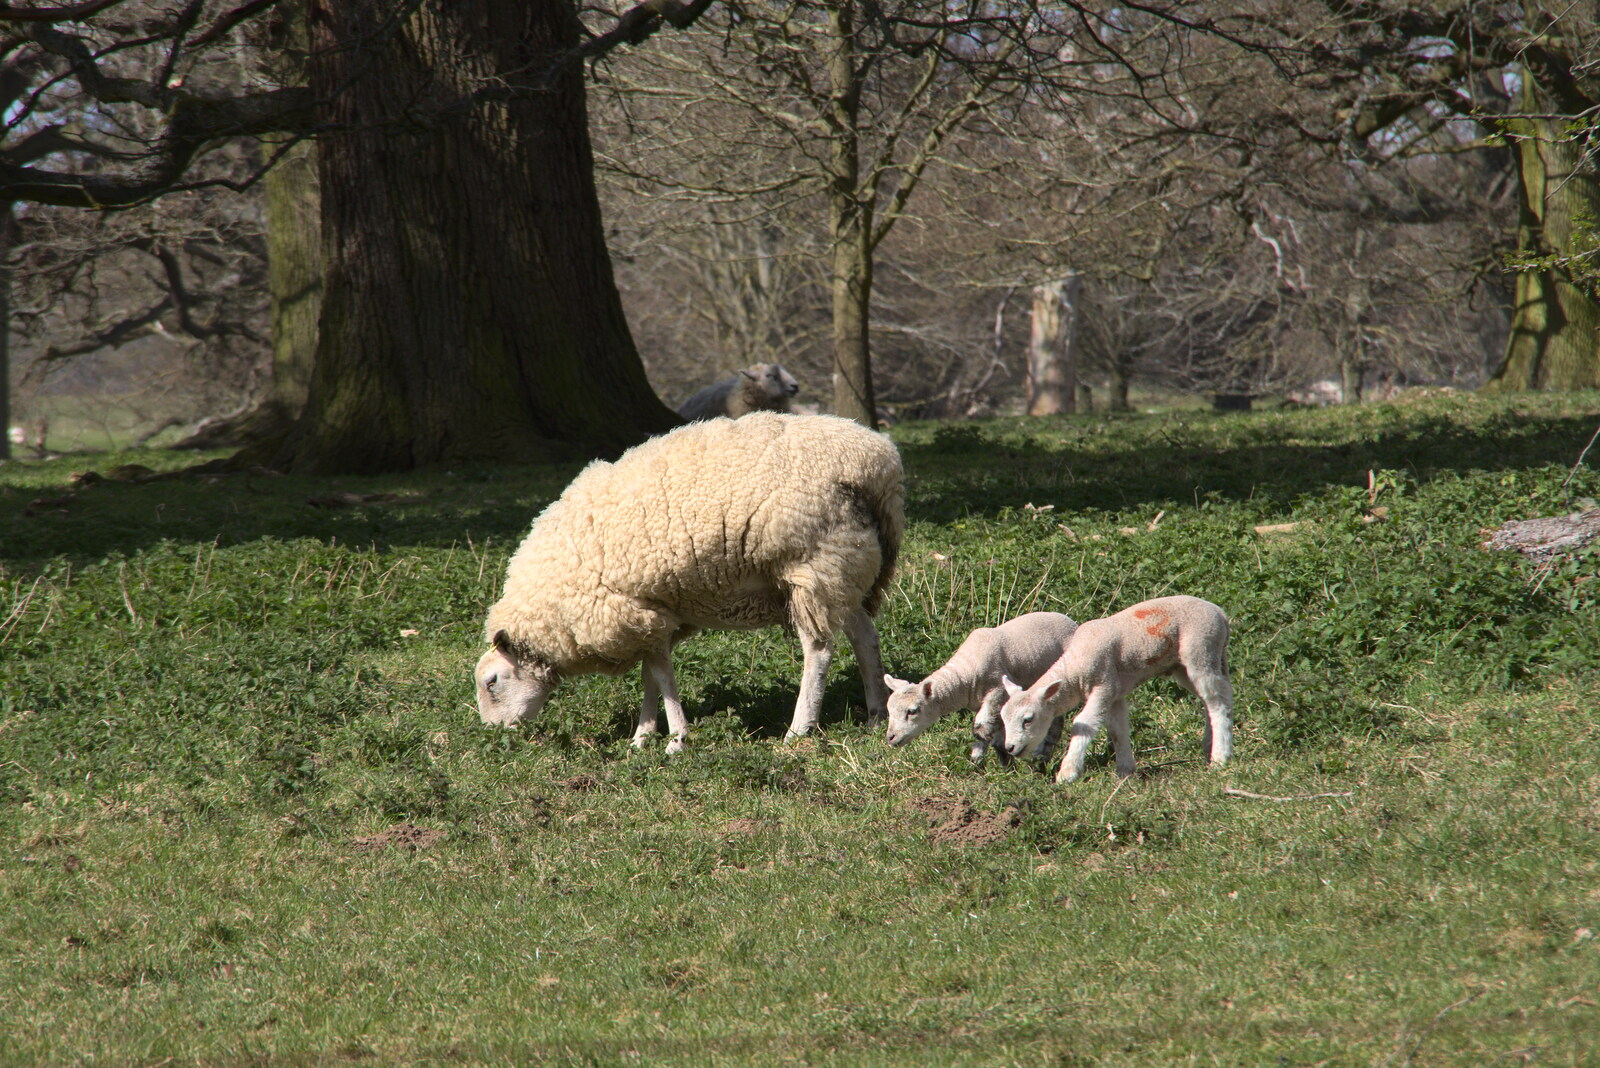 The lambs are out at Ickworth from A Return to Ickworth House, Horringer, Suffolk - 11th April 2021